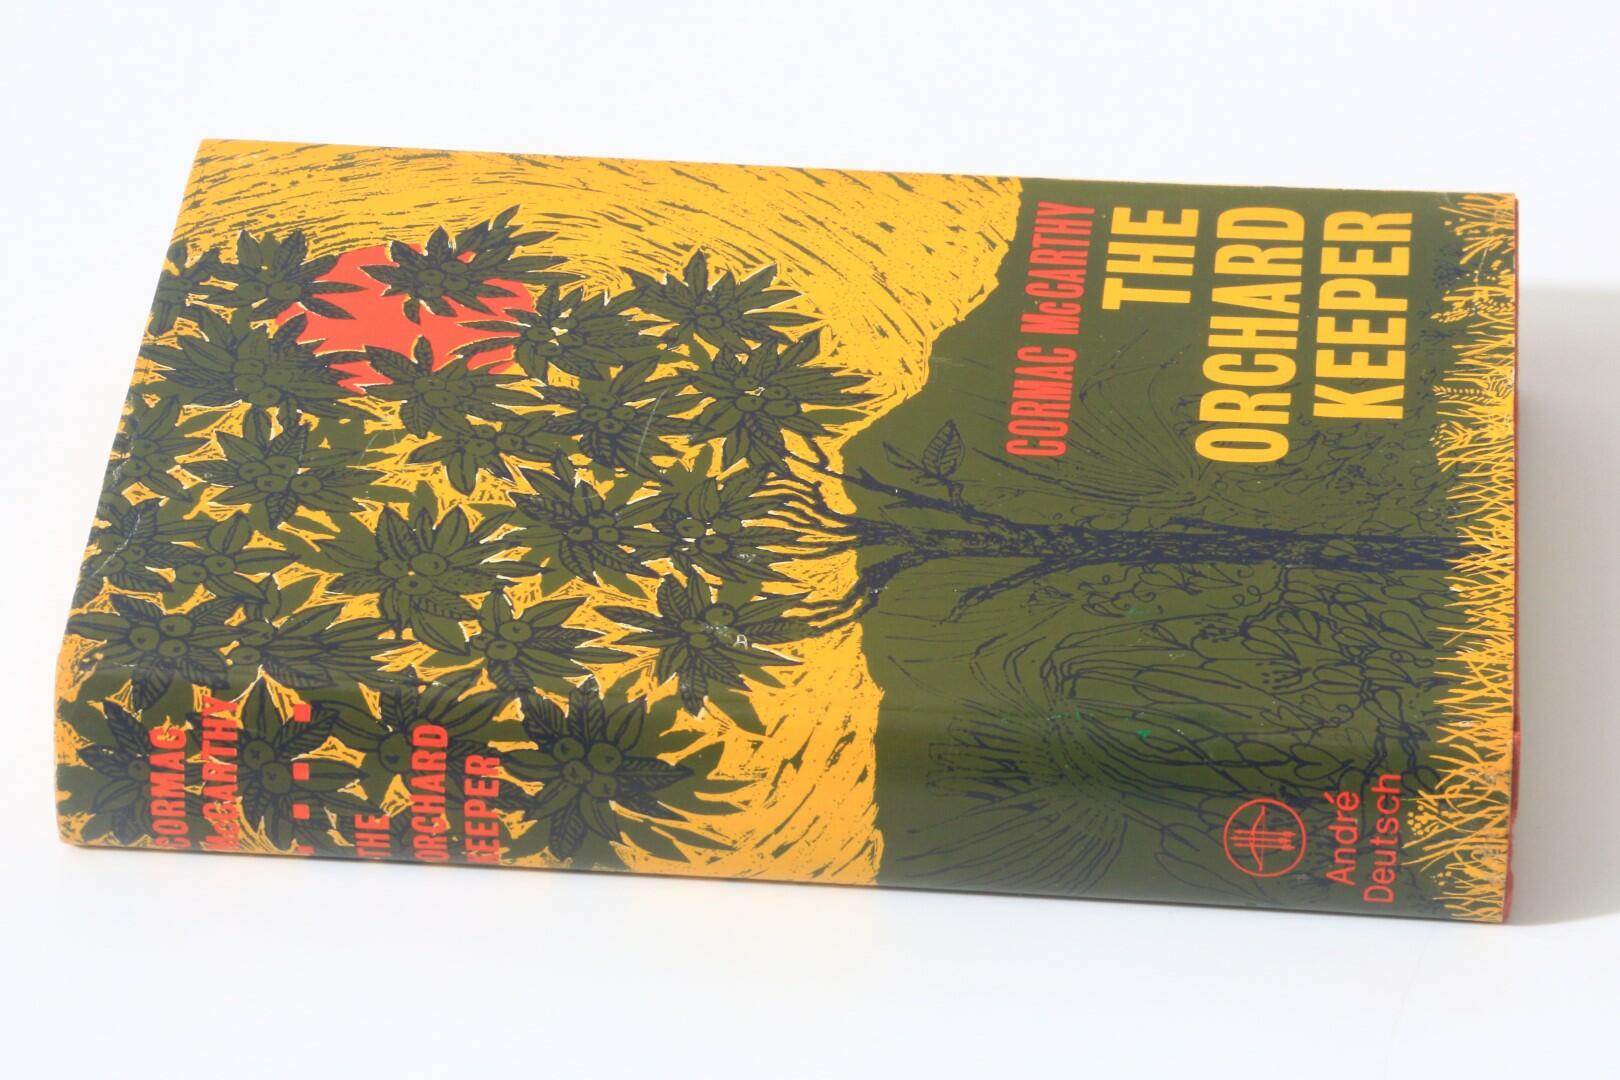 Cormac McCarthy - The Orchard Keeper - Andre Deutsch, 1966, First Edition.